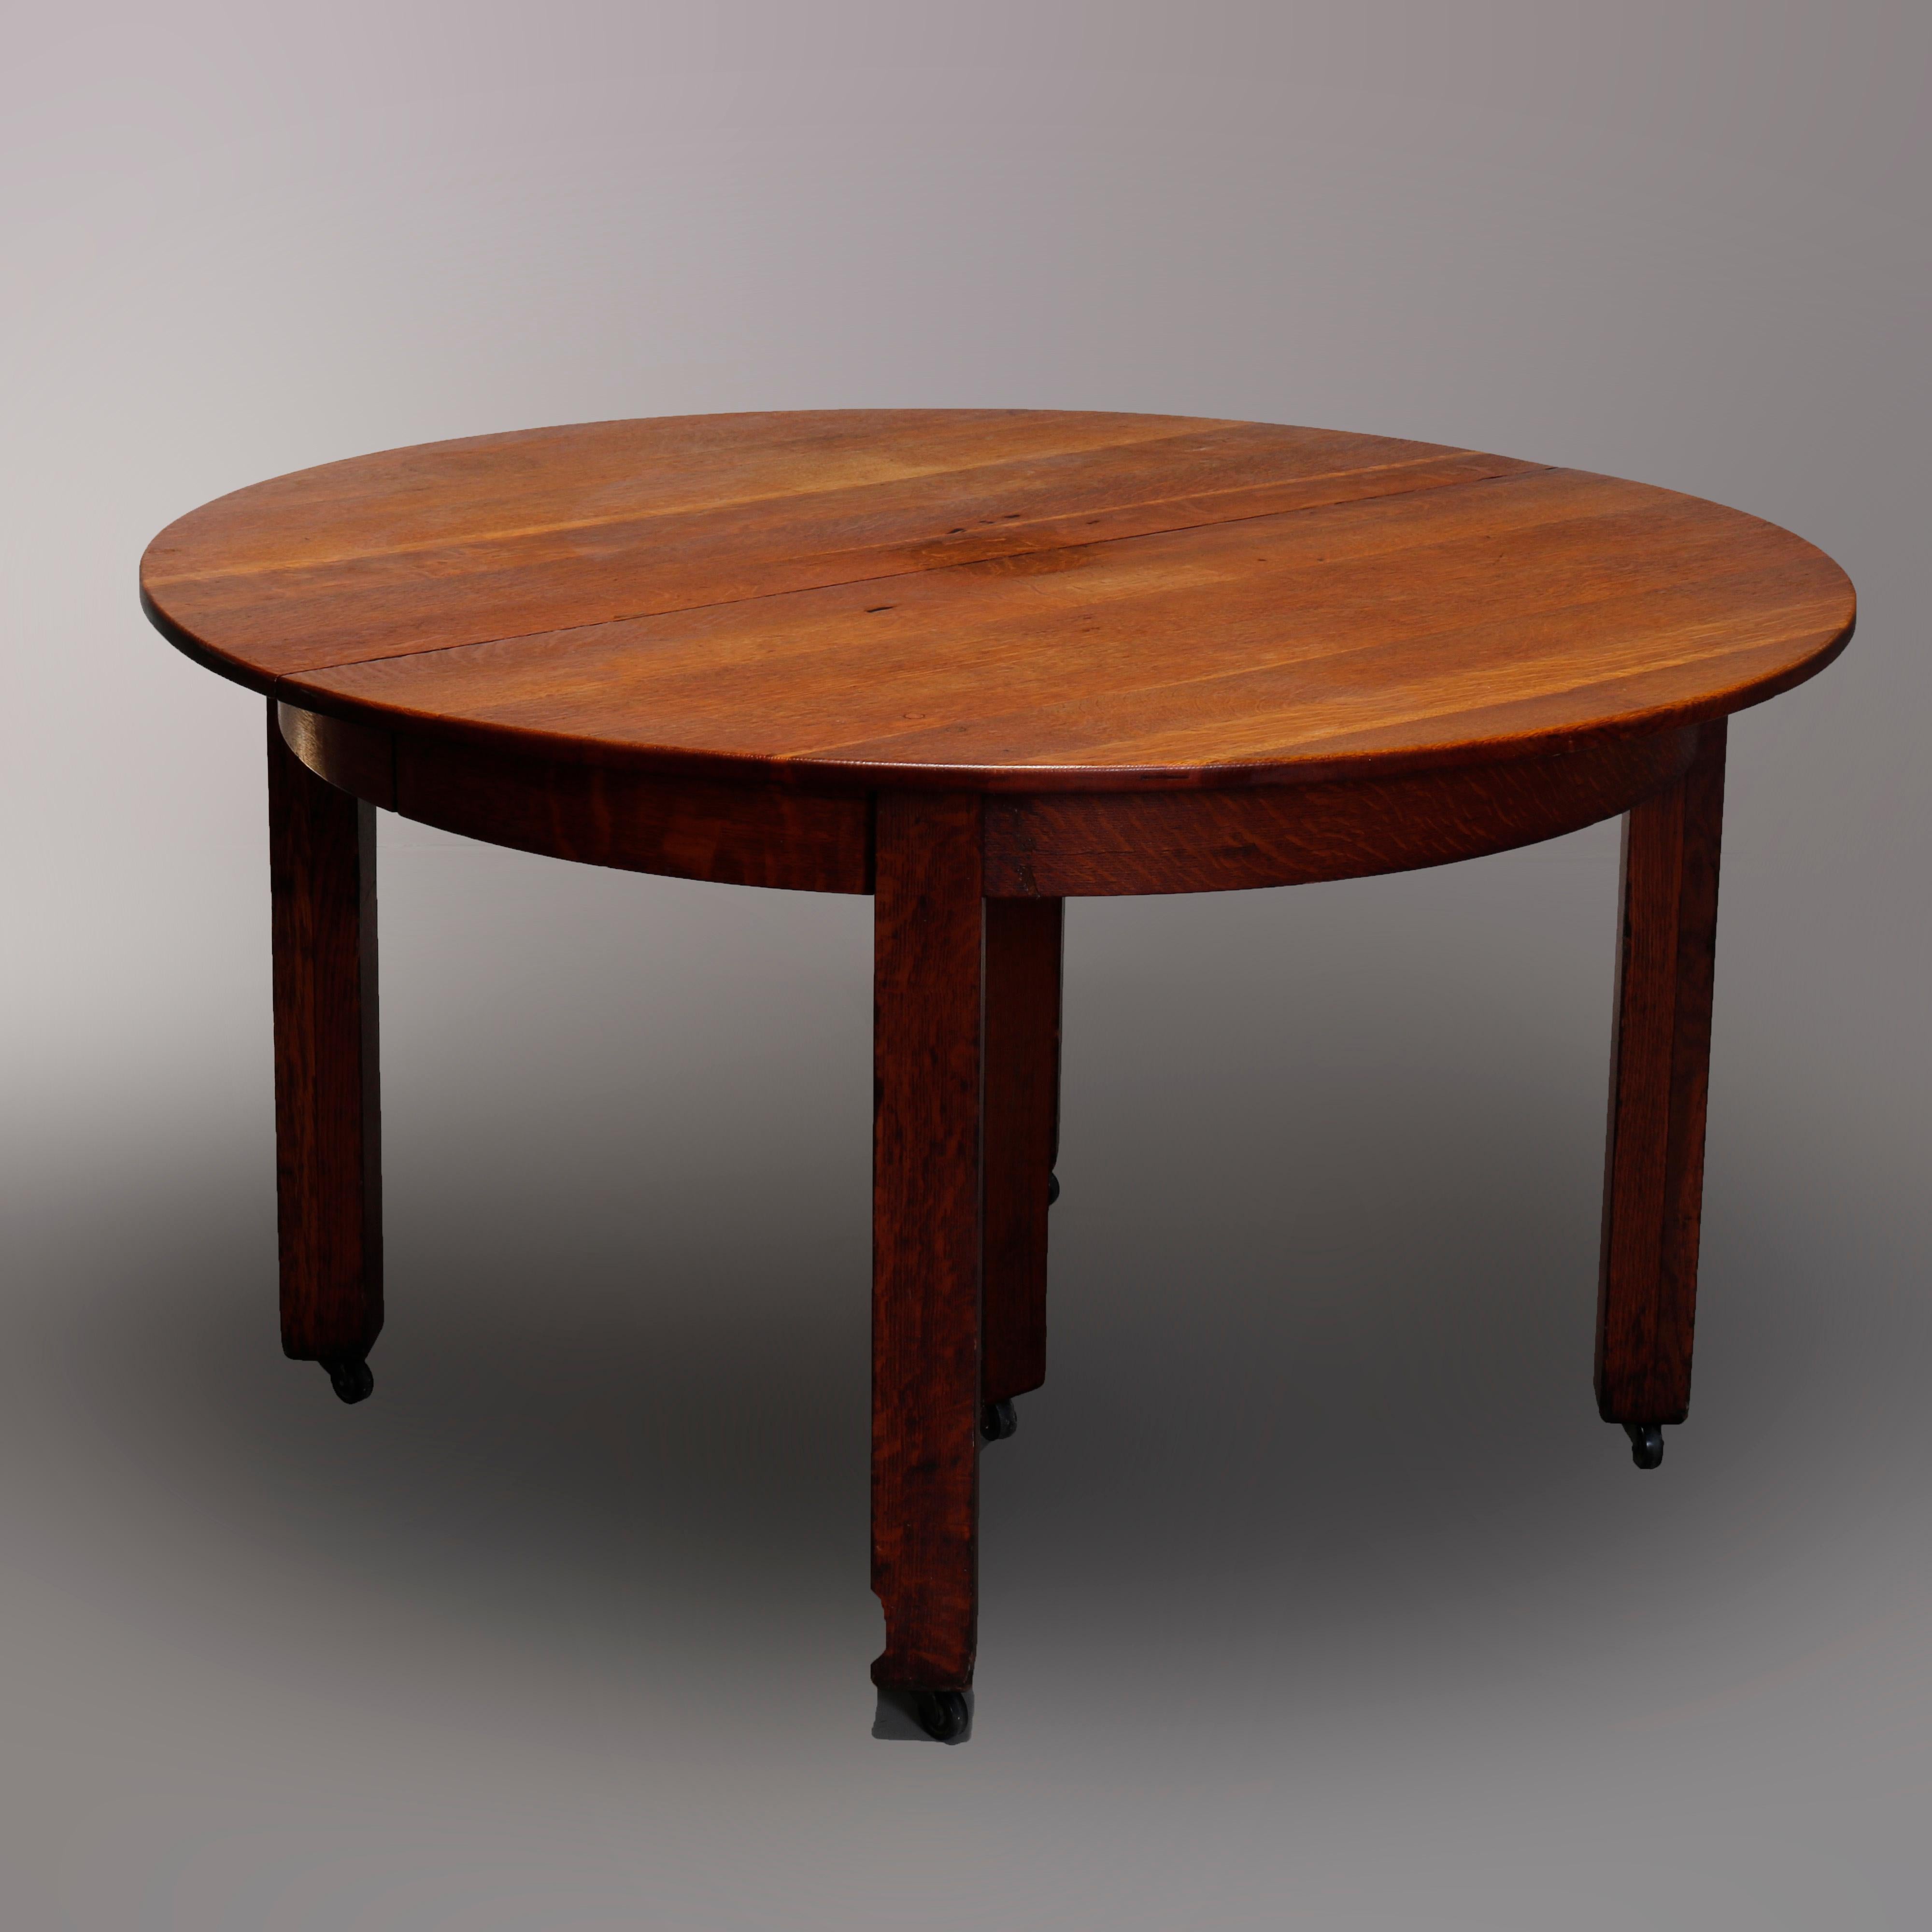 An antique Arts & Crafts Mission dining table by L & J G Stickley Handcraft Catalog #718 offers quarter sawn oak splined construction in round form with deep skirt, raised on square and straight legs, unmarked and without leaves, c1910.

Measures: